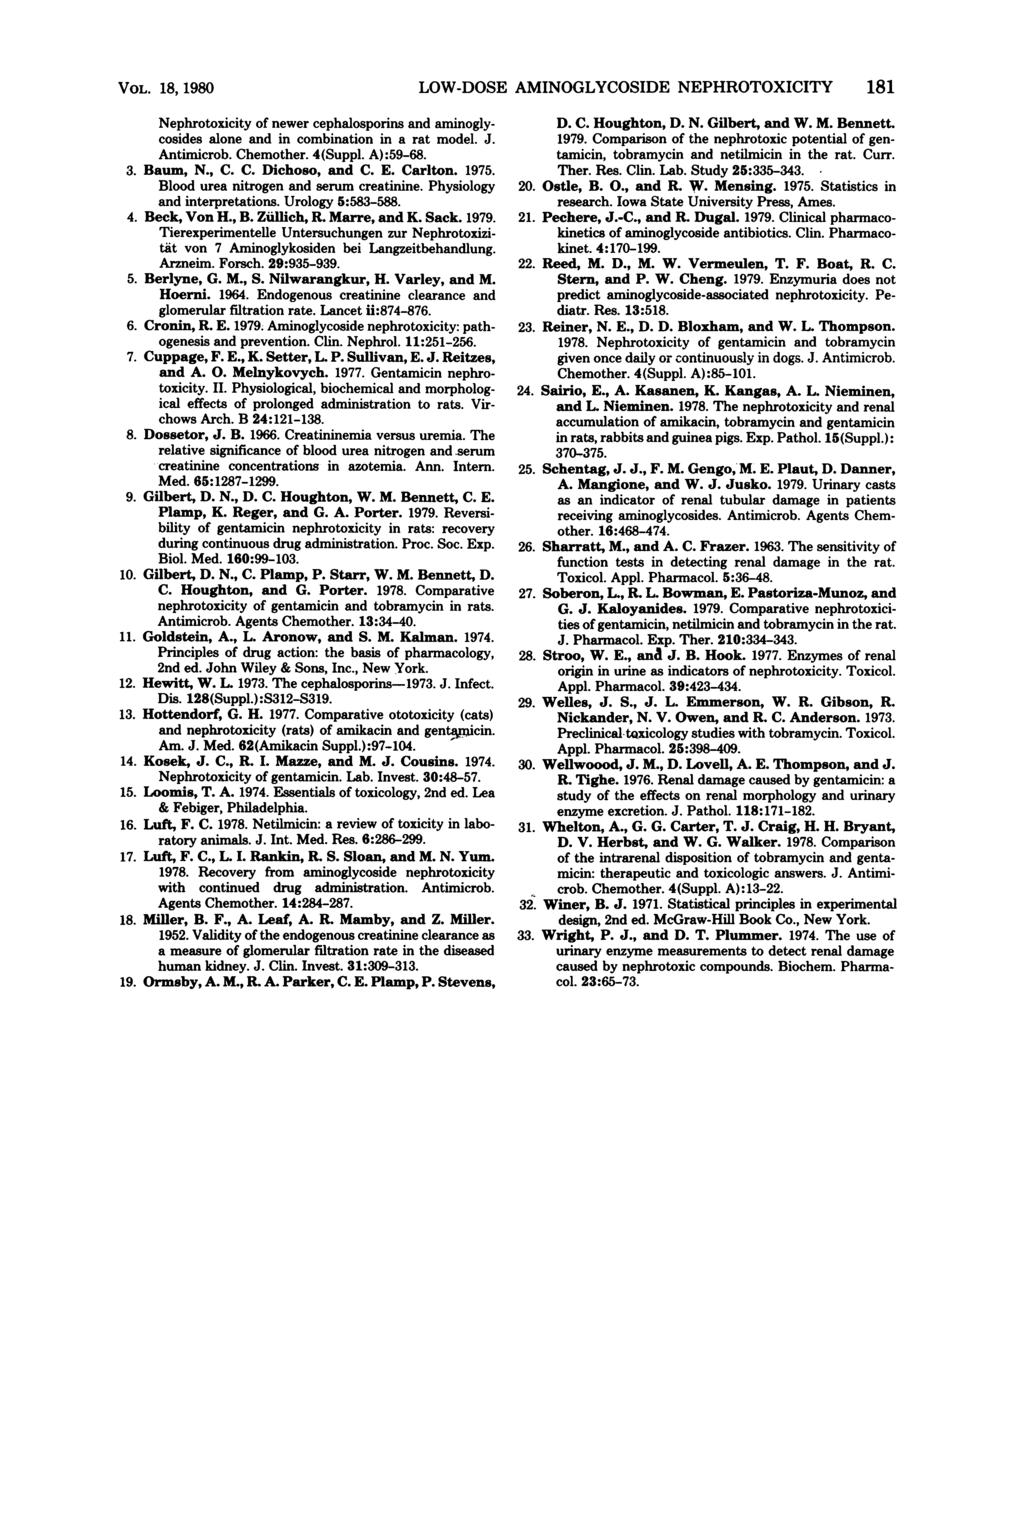 VOL. 18, 1980 Nephrotoxicity of newer cephalosporins and aminoglycosides alone and in combination in a rat model. J. Antimicrob. Chemother. 4(Suppl. A):59-68. 3. Baum, N., C. C. Dichoso, and C. E.